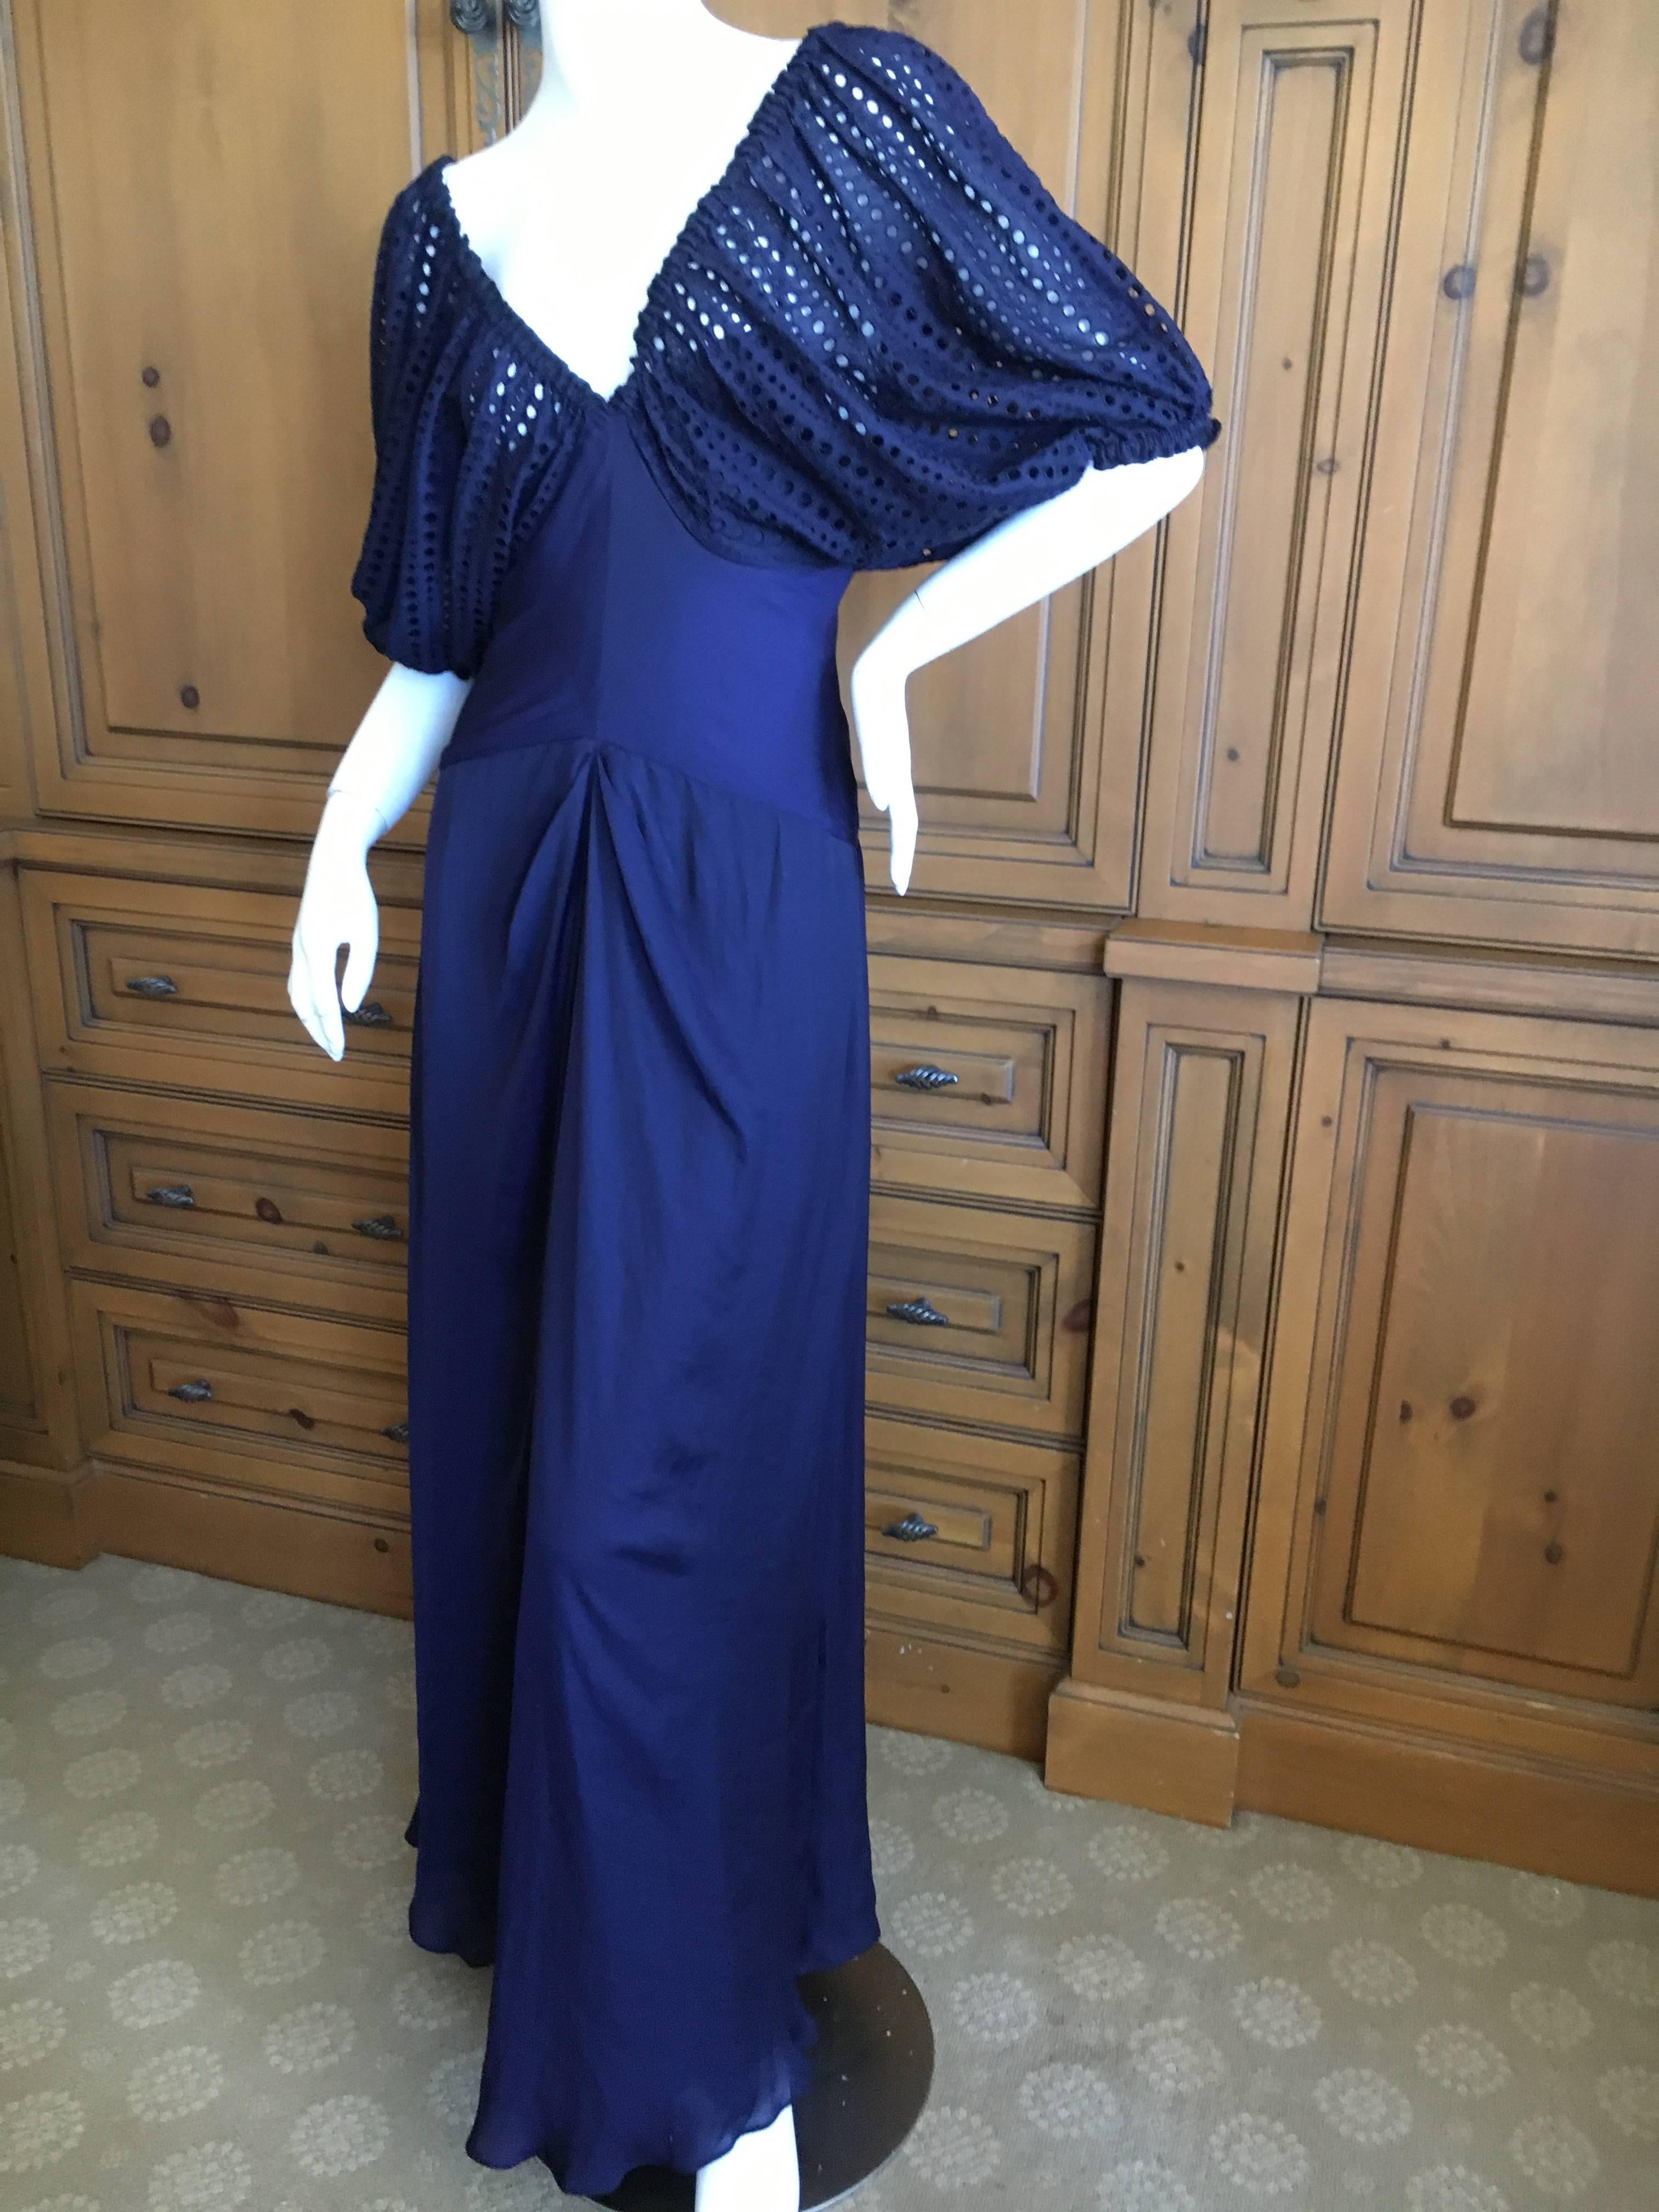 Jean Paul Gaultier Navy Blue Low Cut Evening Dress with Lace Eyelet Lace Sleeves.
So pretty, in a 30's inspired style.
Size 36
Bust 36"
Waist 30"
Hips  42"
Length 62"
Excellent pre owned condition